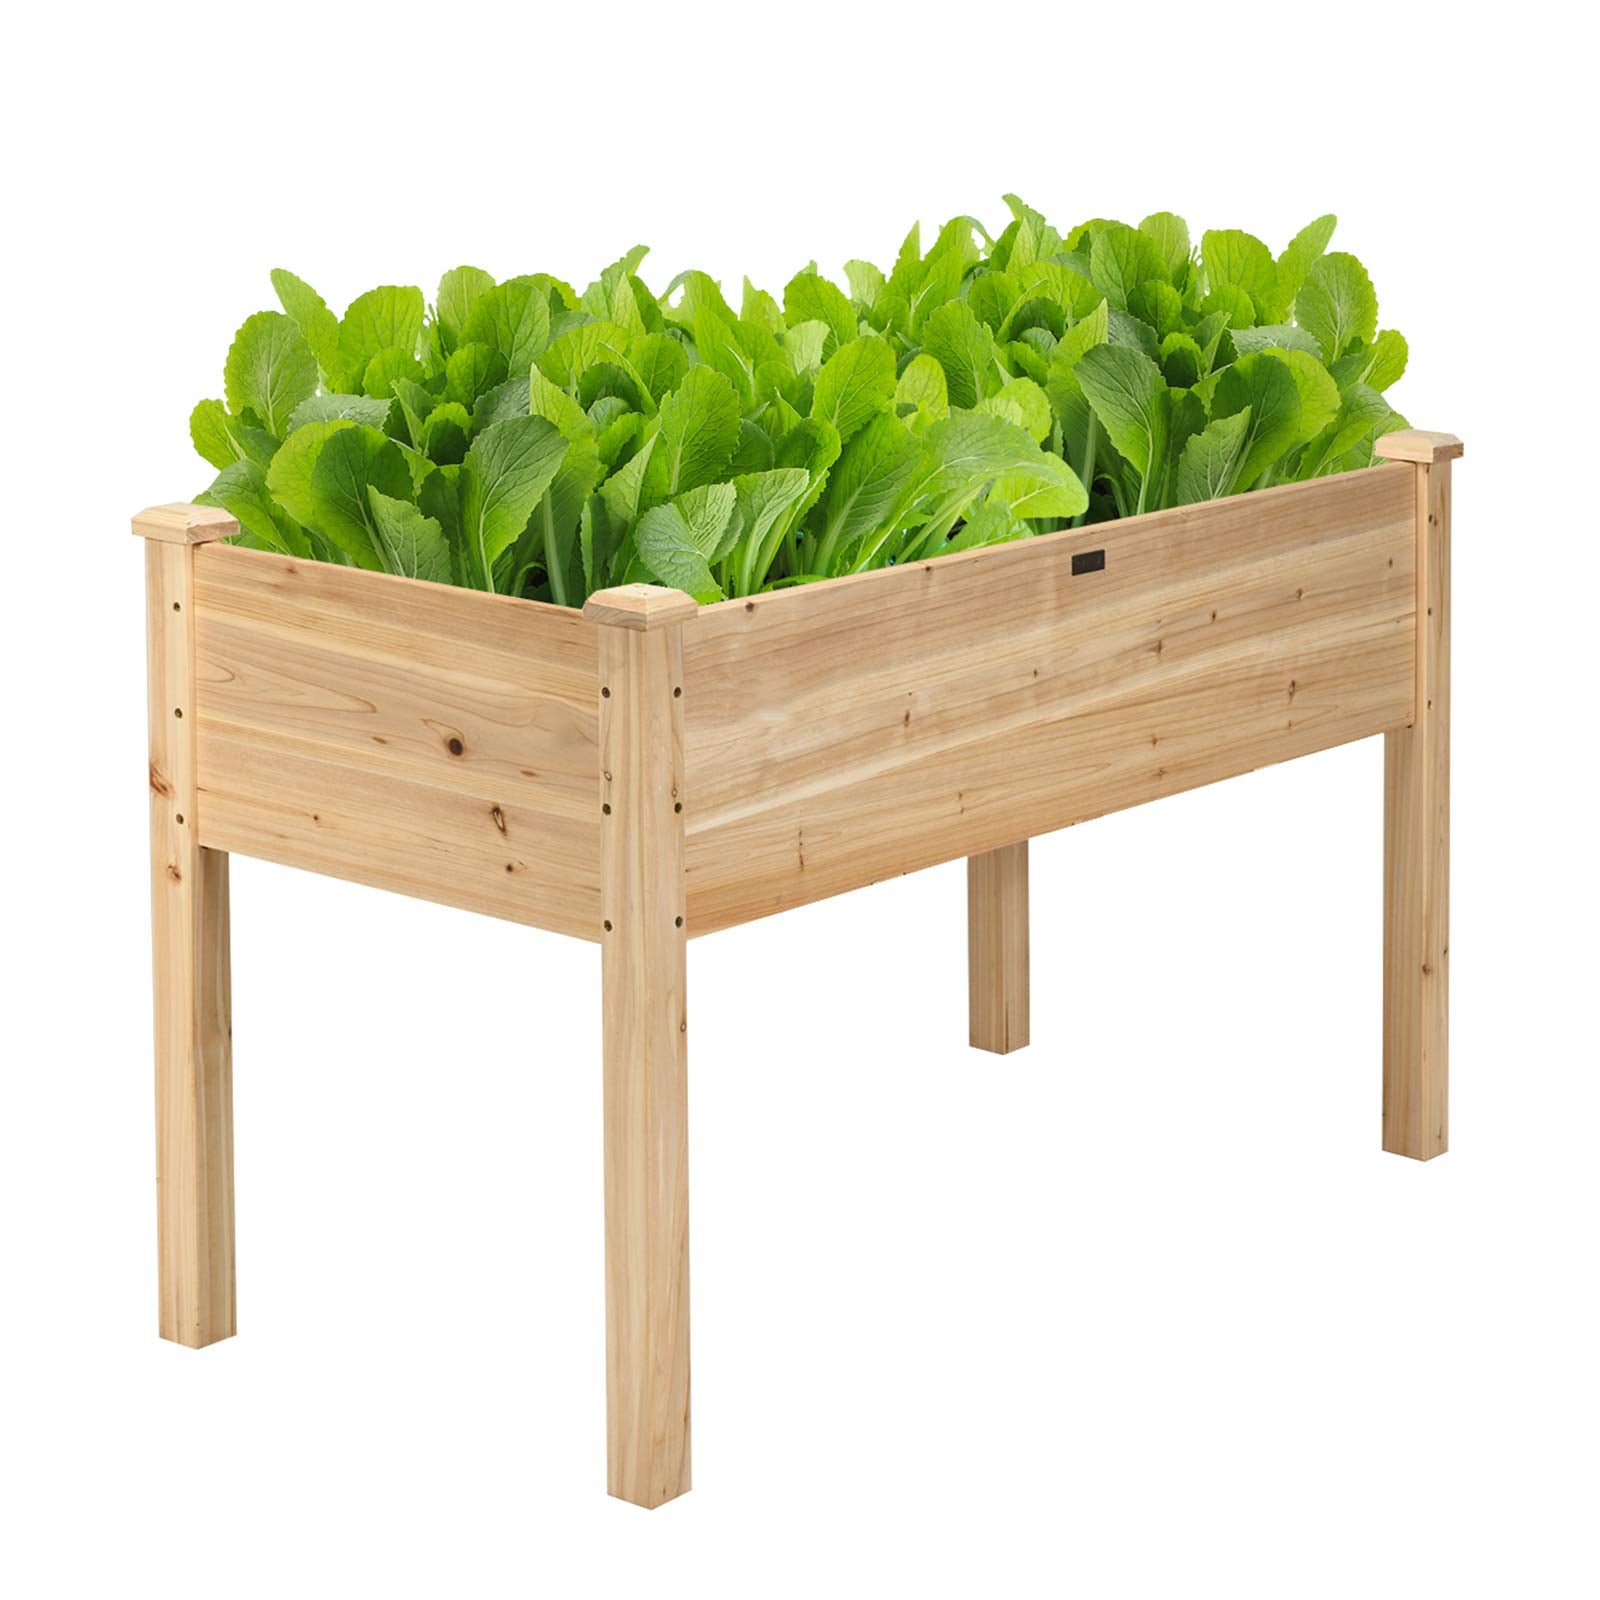 Giantex Raised Garden Bed, Wood Planter Box with Legs, Drain Holes, Elevated Garden Bed for Vegetables, Standing Garden Container Planter Raised Beds for Backyard, Patio, 49